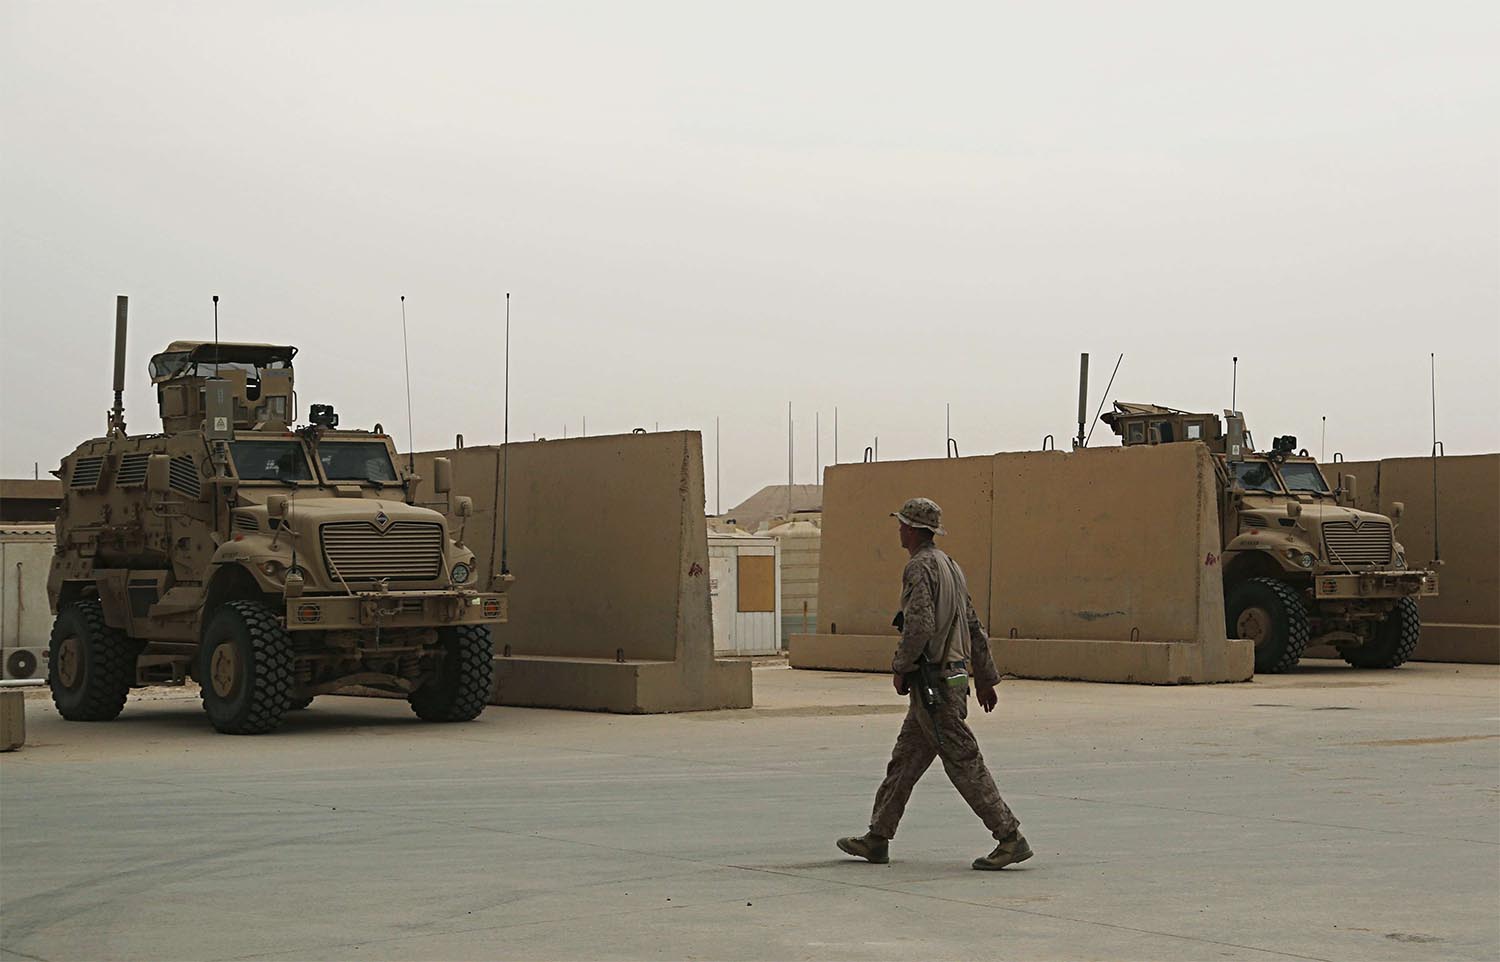 US Marines are stationed in Ain al-Asad air base in Iraq